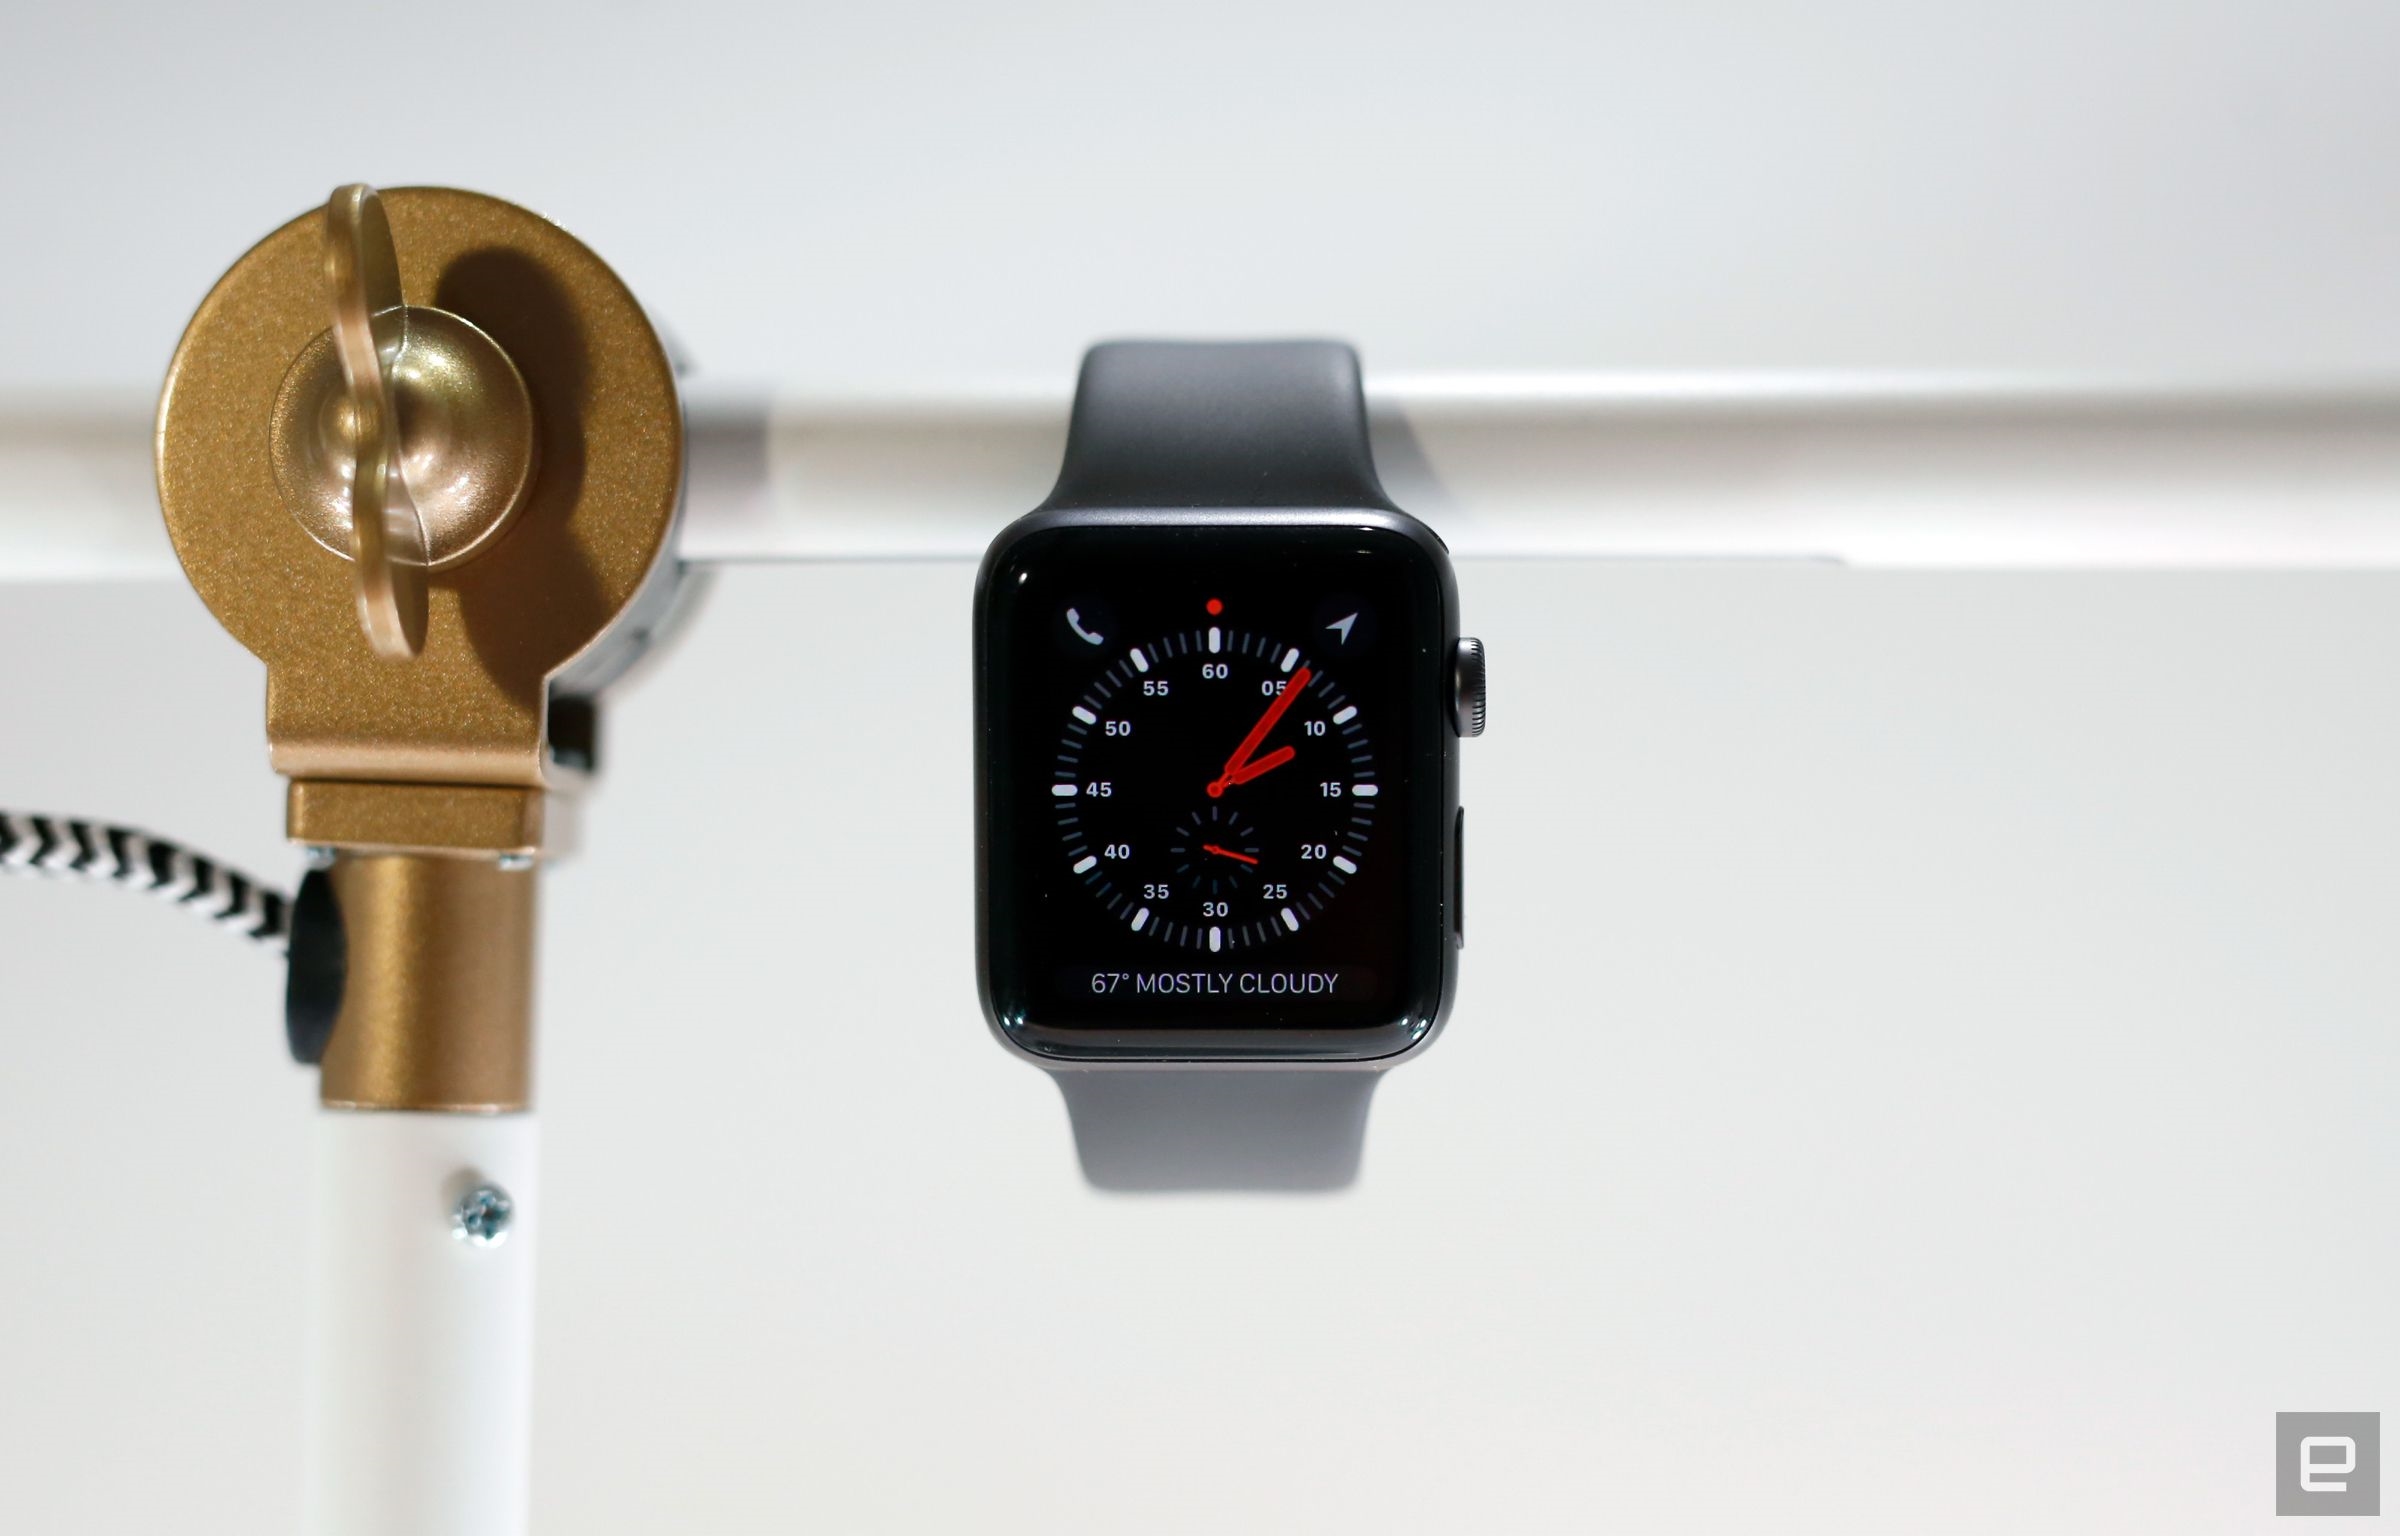 Apple Watch Series 3 owners deal with random reboots in watchOS 7 | DeviceDaily.com